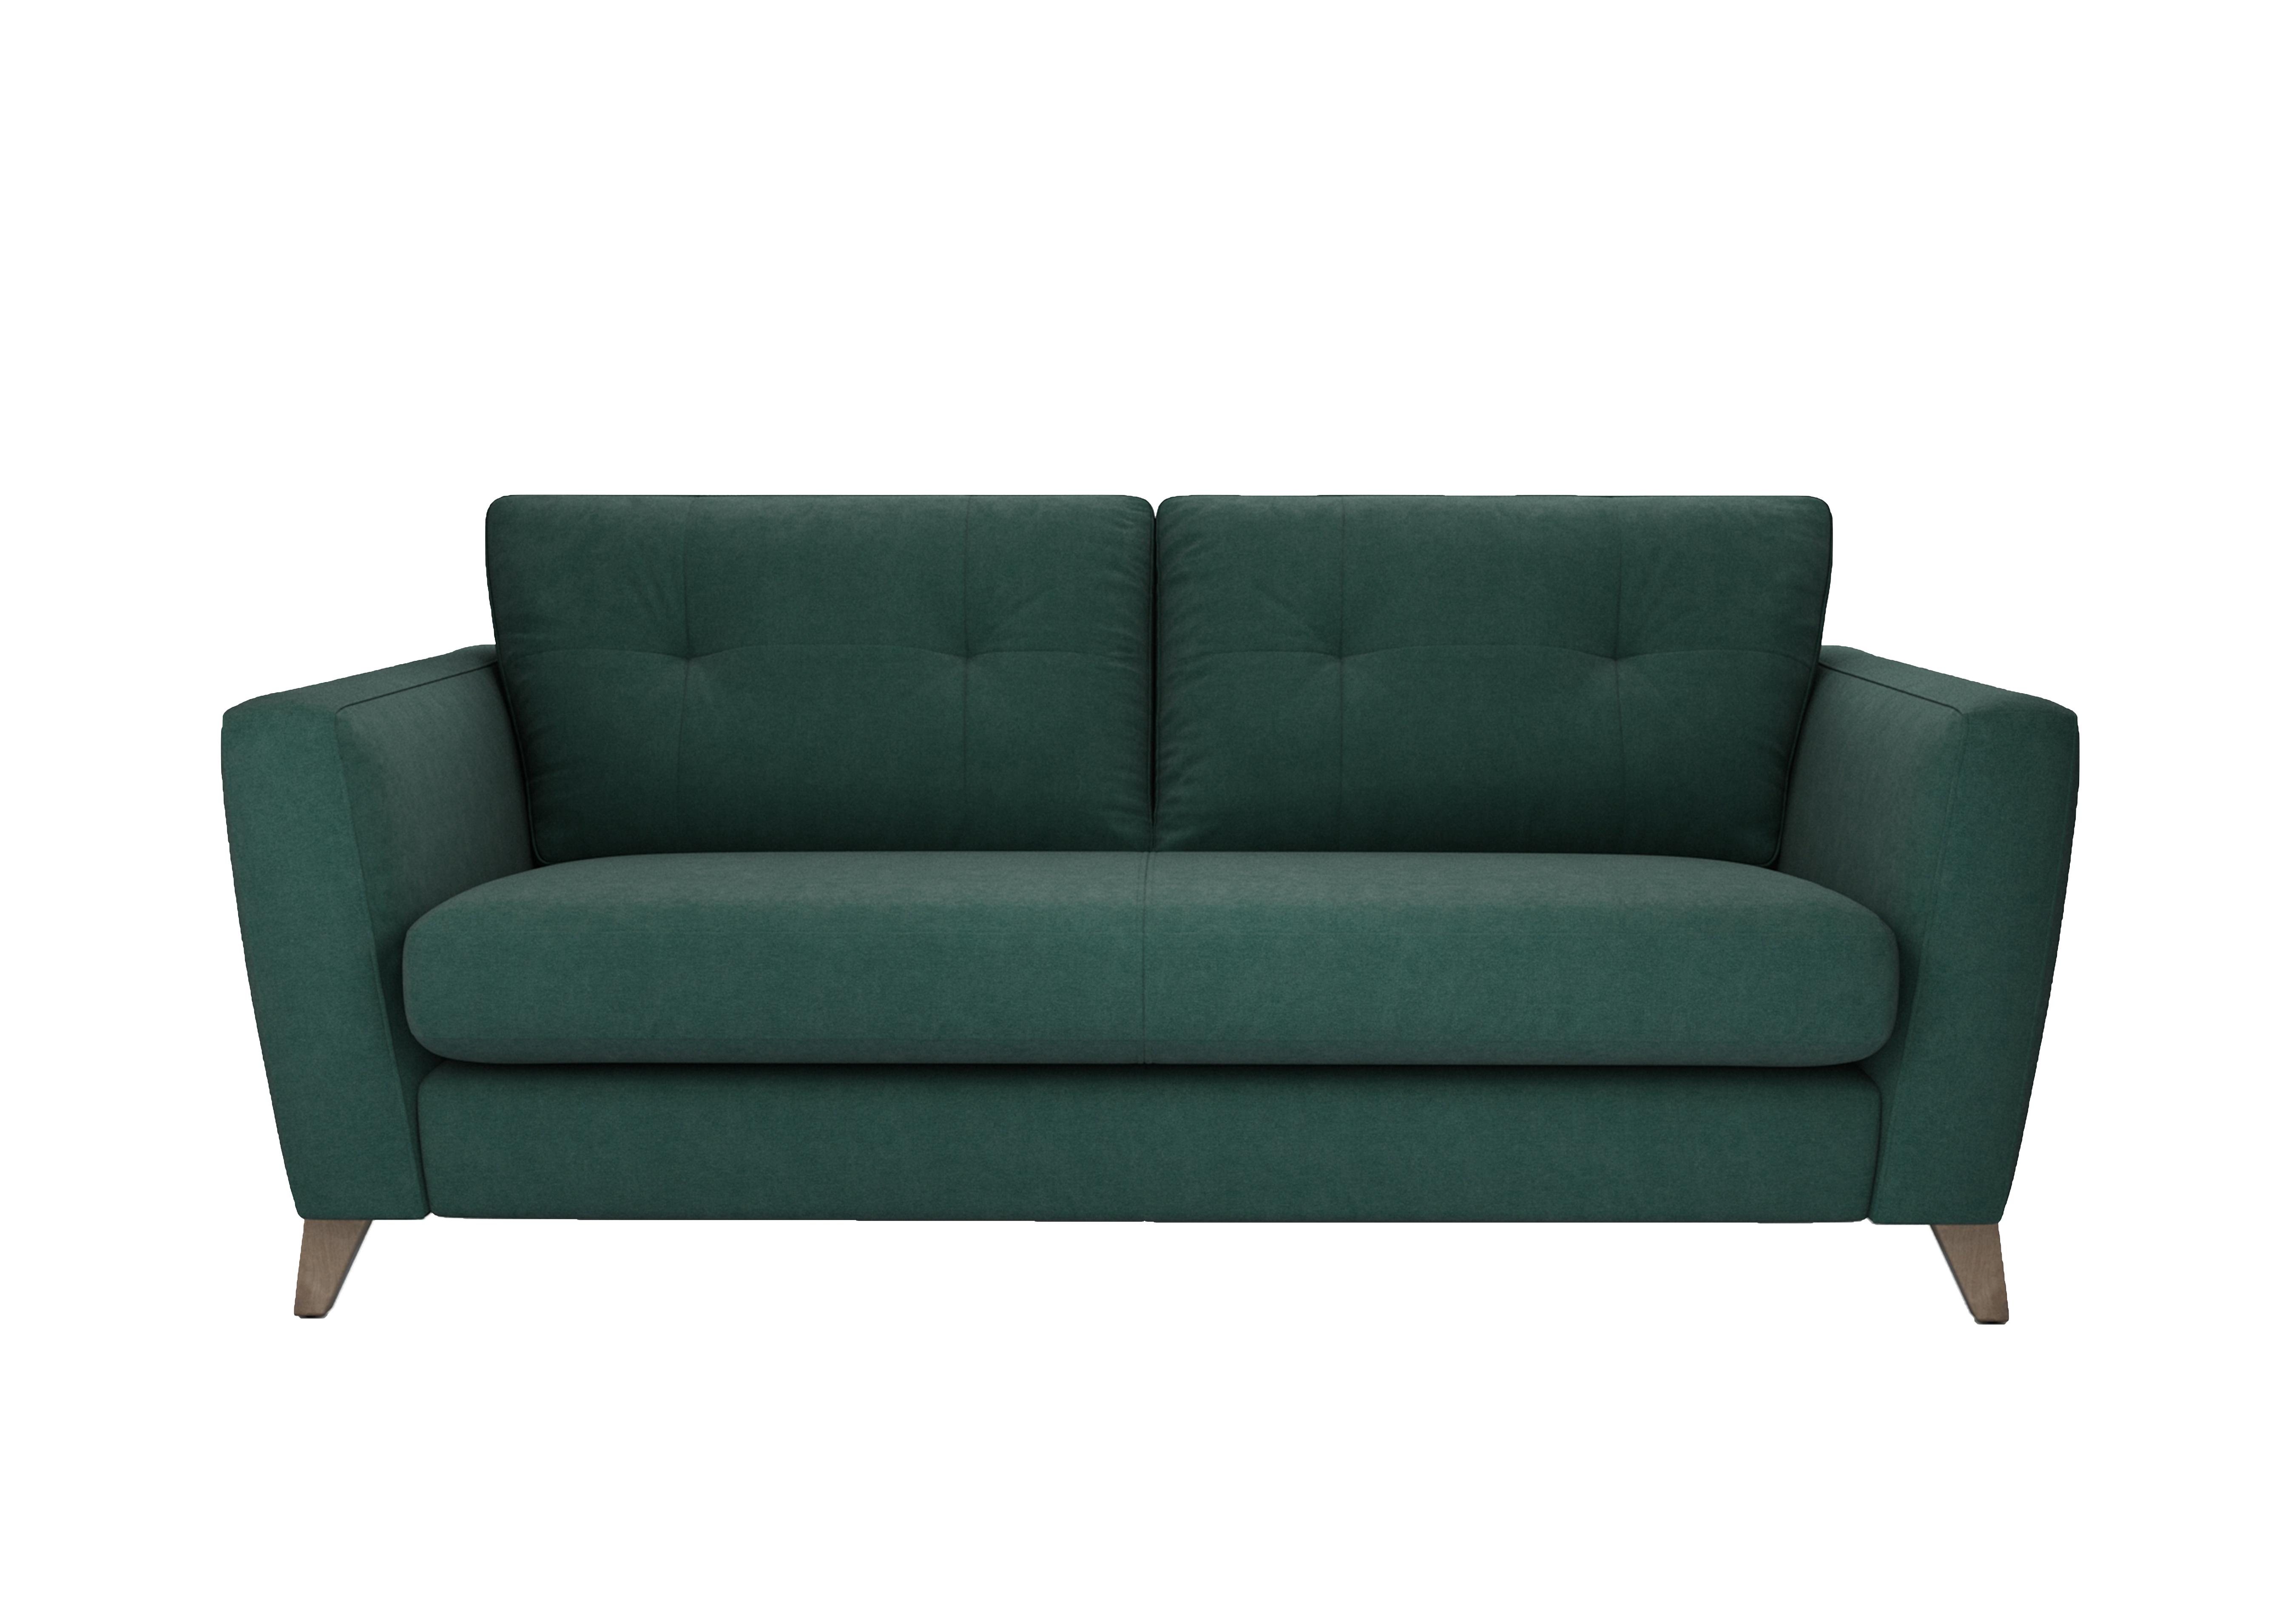 Hermione 3 Seater Fabric Sofa in Cur226 Curly Kale Wo Ft on Furniture Village